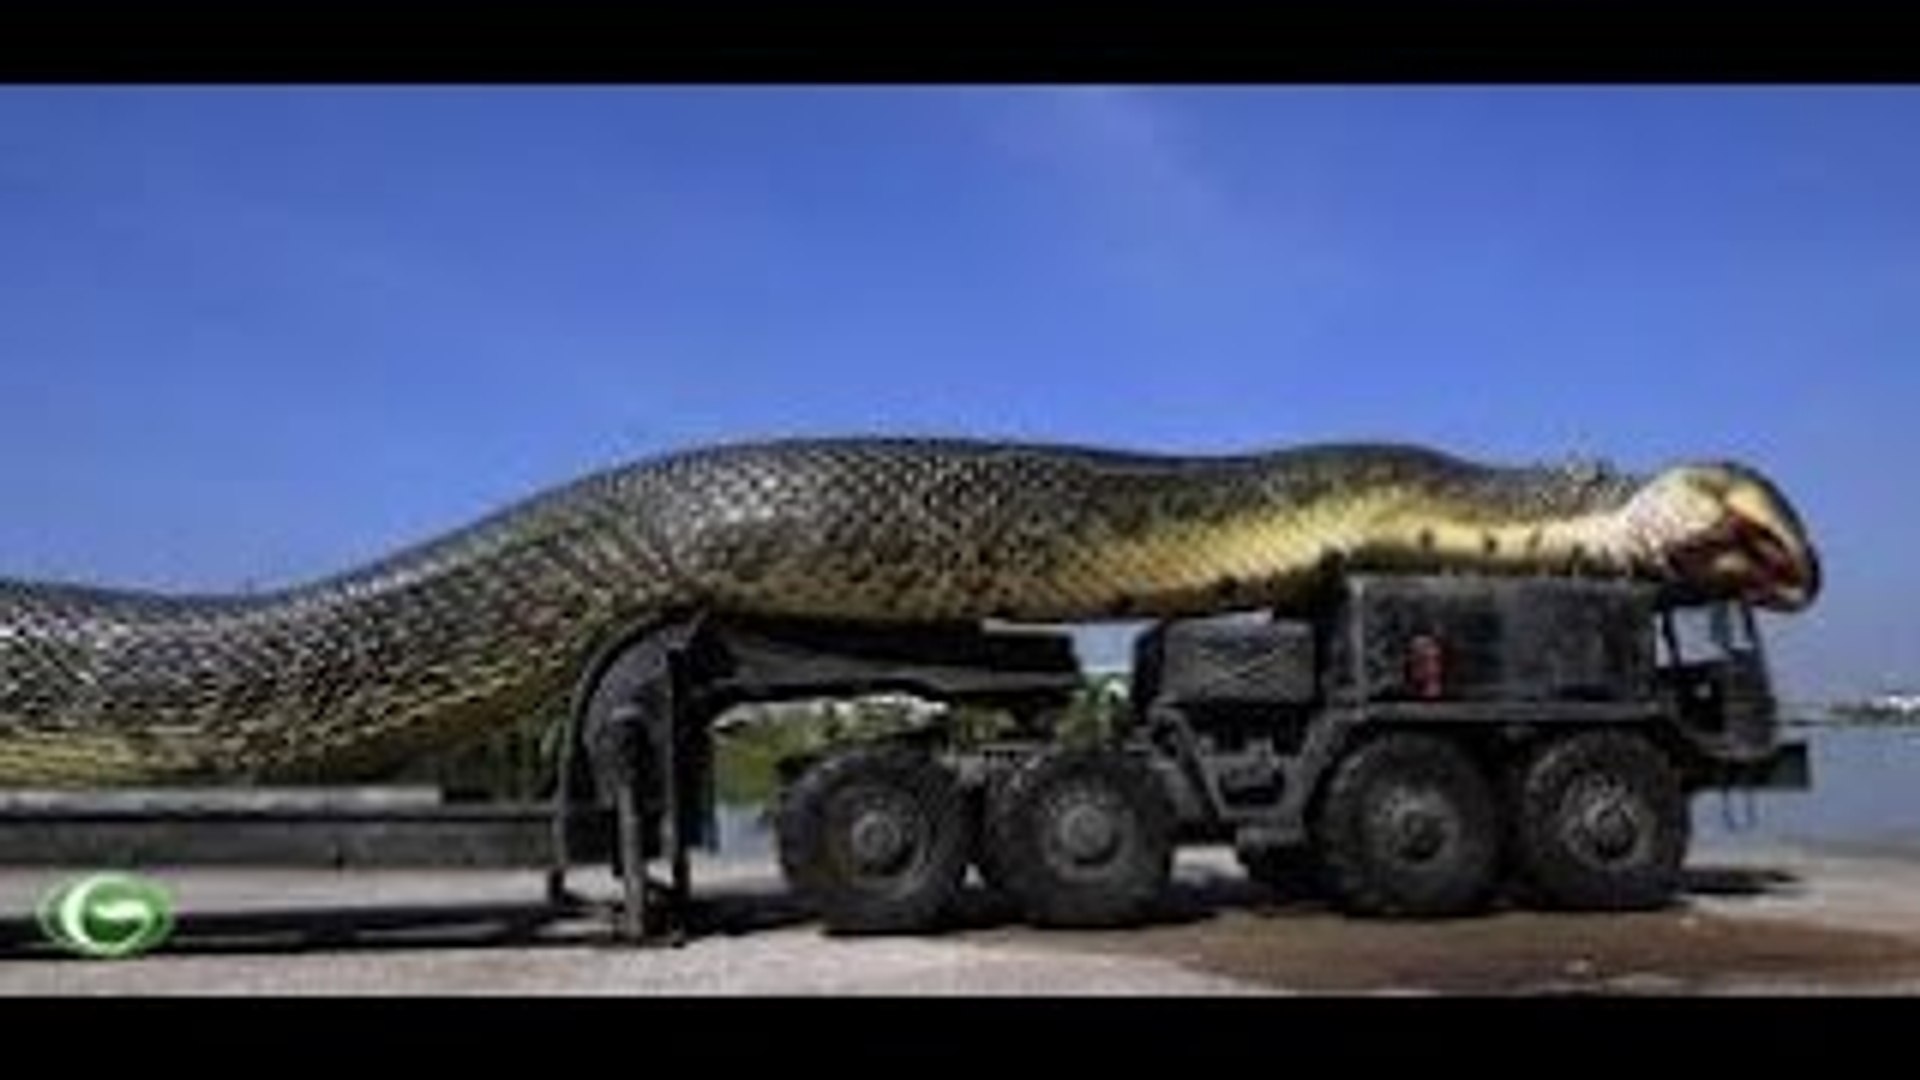 What Is the Biggest Snake in the World?